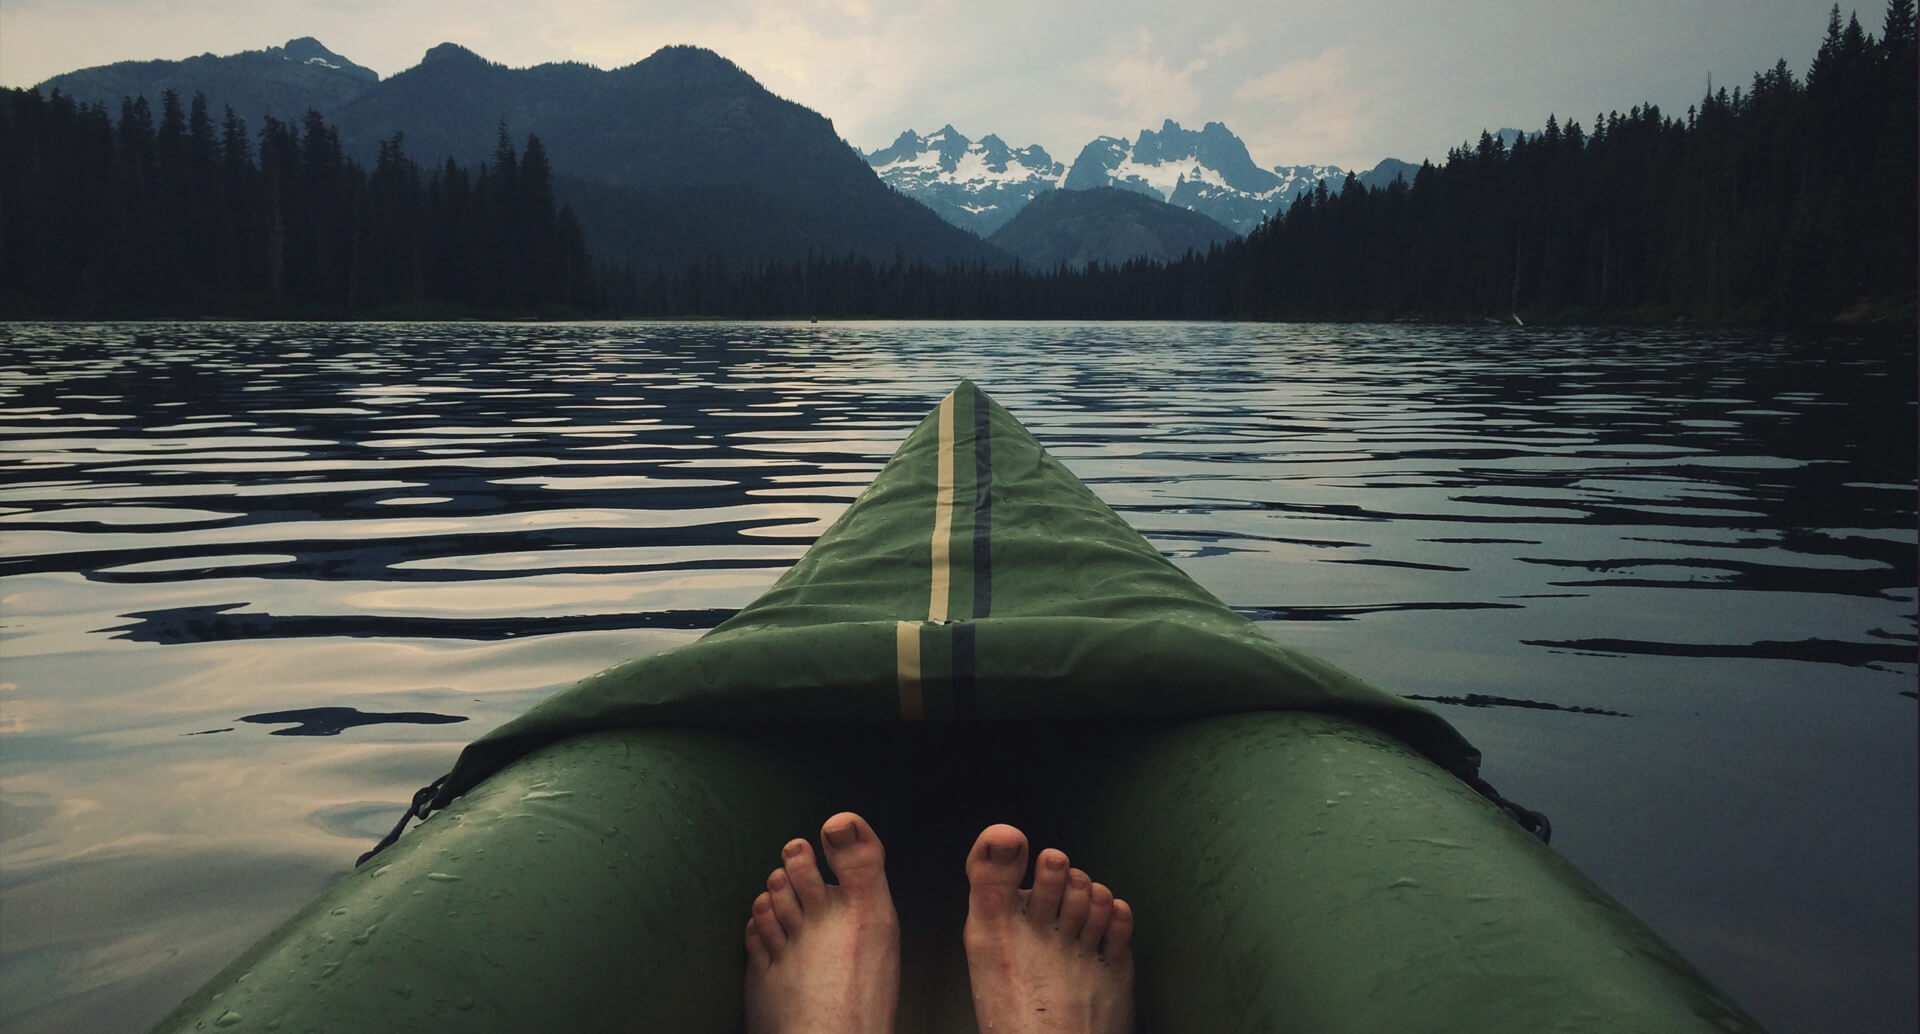 A person sits in a canoe on a lake with the mountains in the background. You can only see their feet, as the photo was taken from their perspective.